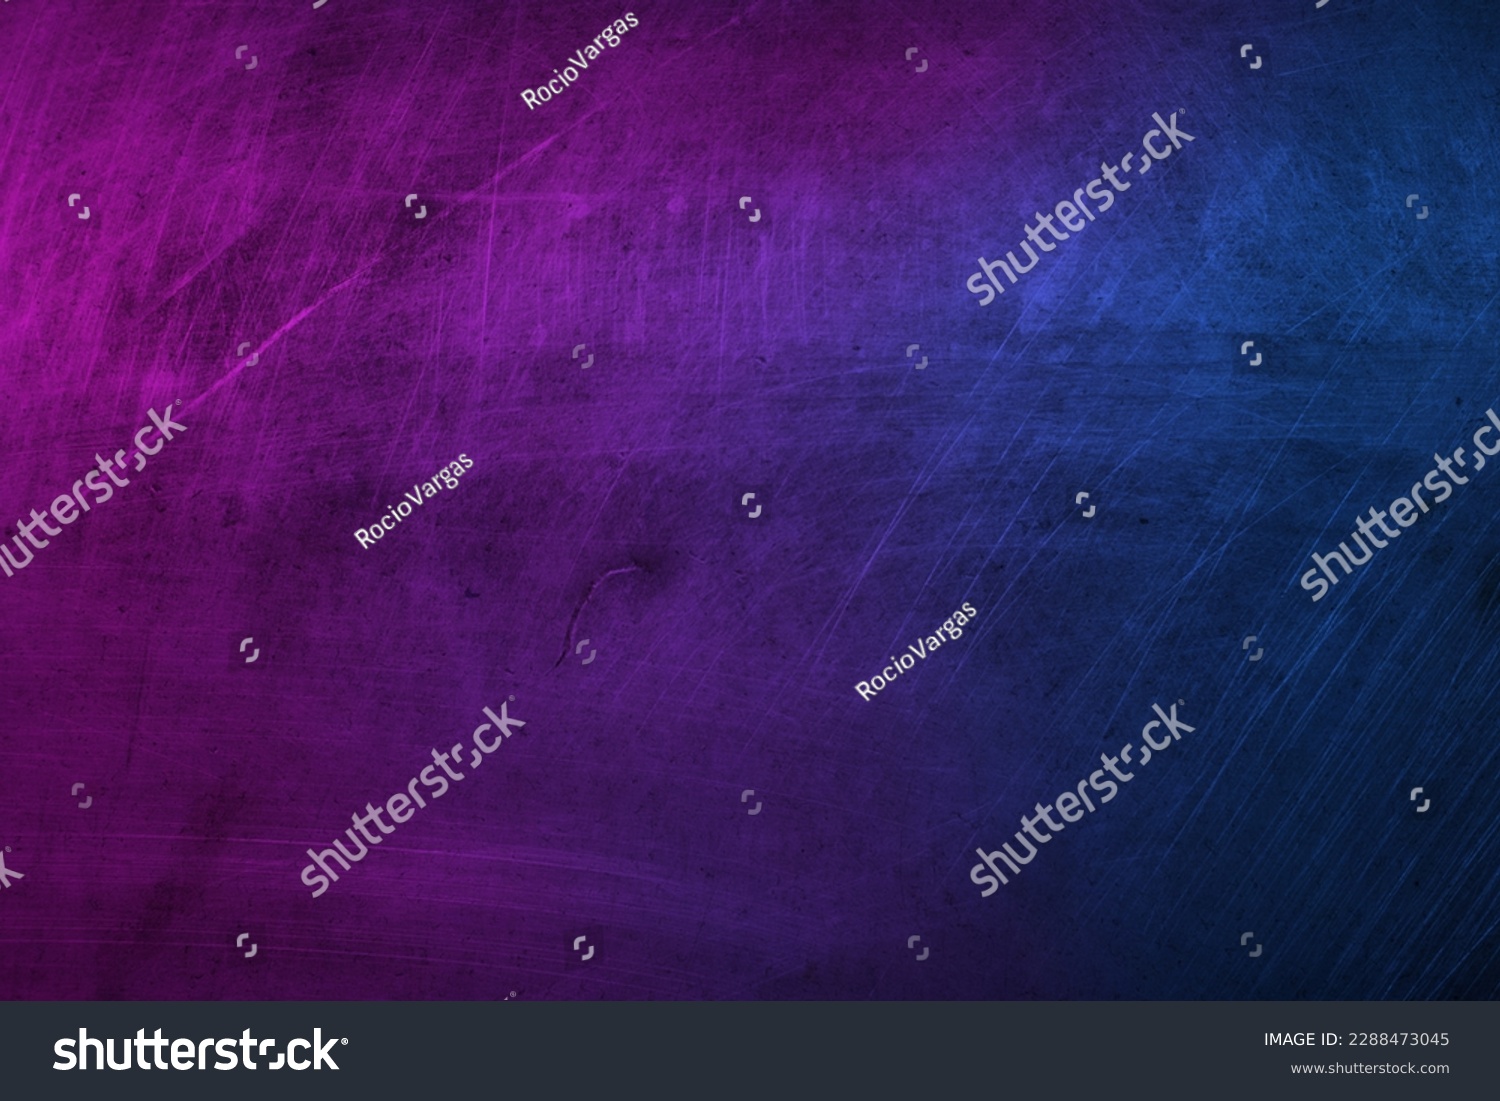 Ripped background, dark background with blue and magenta highlights, old and black textured background. #2288473045